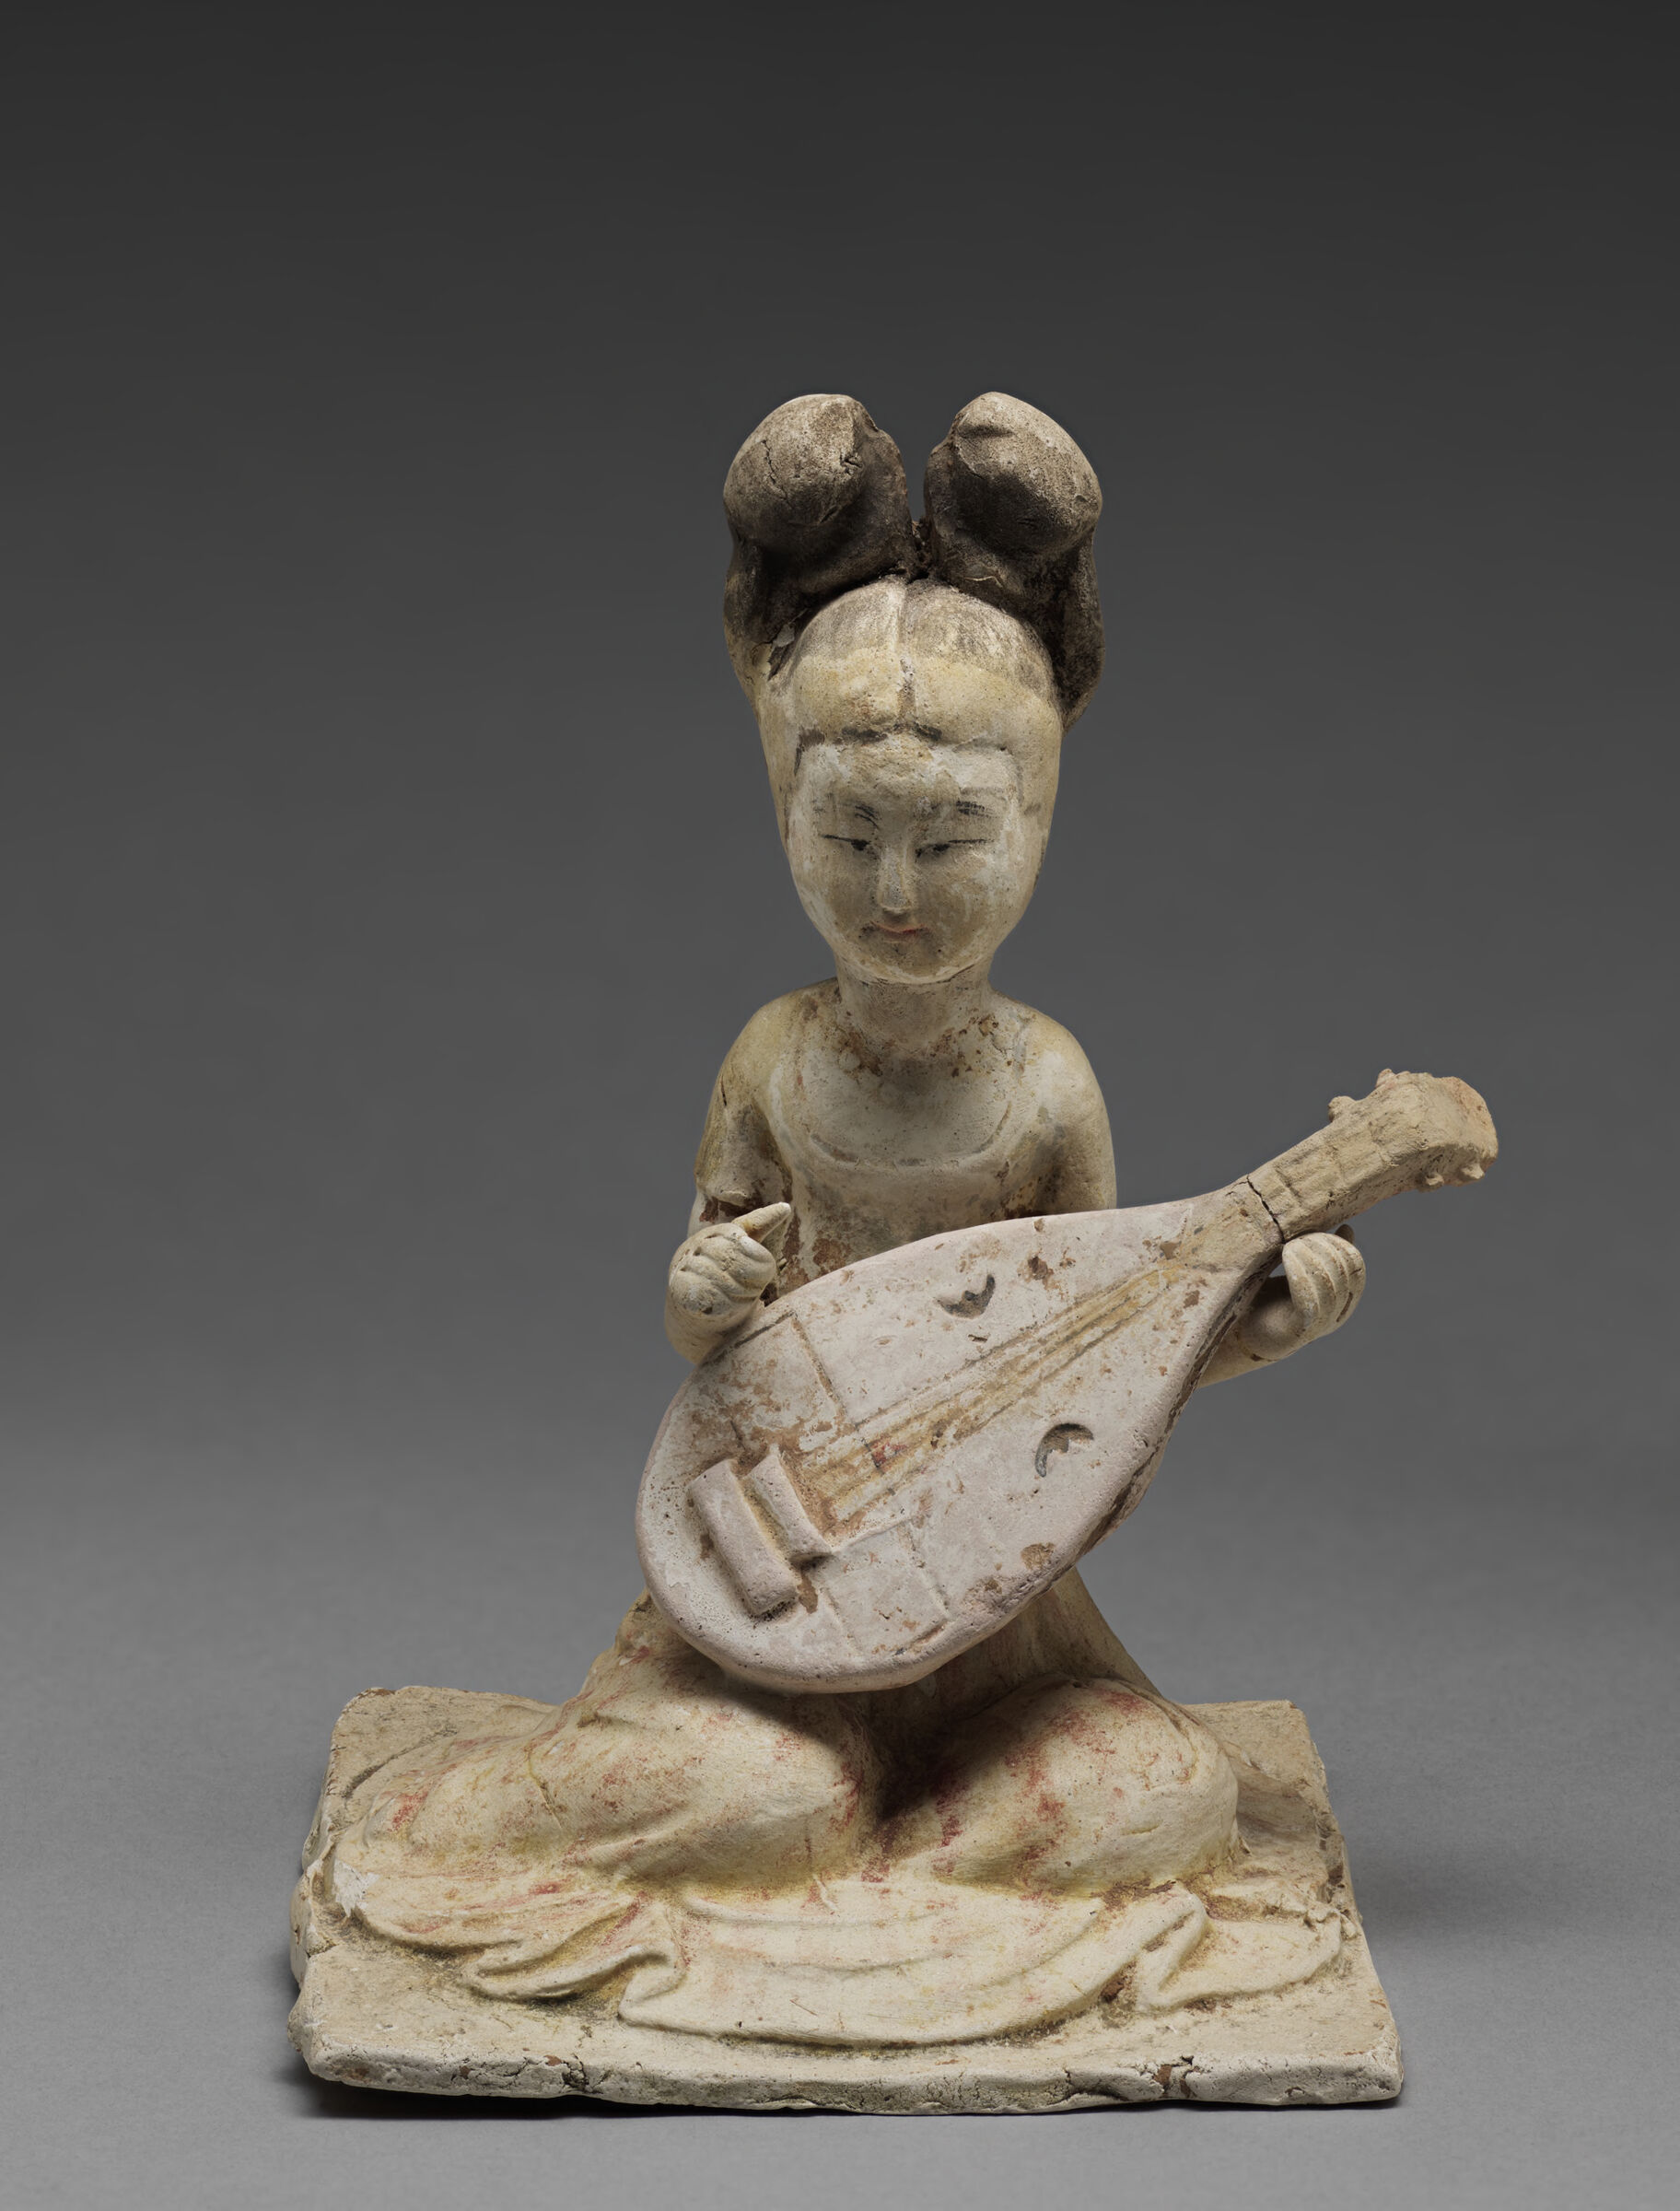 Female Court Musician Holding A 'Pipa', From The Tomb Sculpture Set: Four Kneeling, Female Court Musicians (One With A 'Pipa', Or Lute, And One With Cymbals), Each Of The Four With A High-Waisted, Striped Dress Or Skirt And With Long Hair Arranged In Two Buns